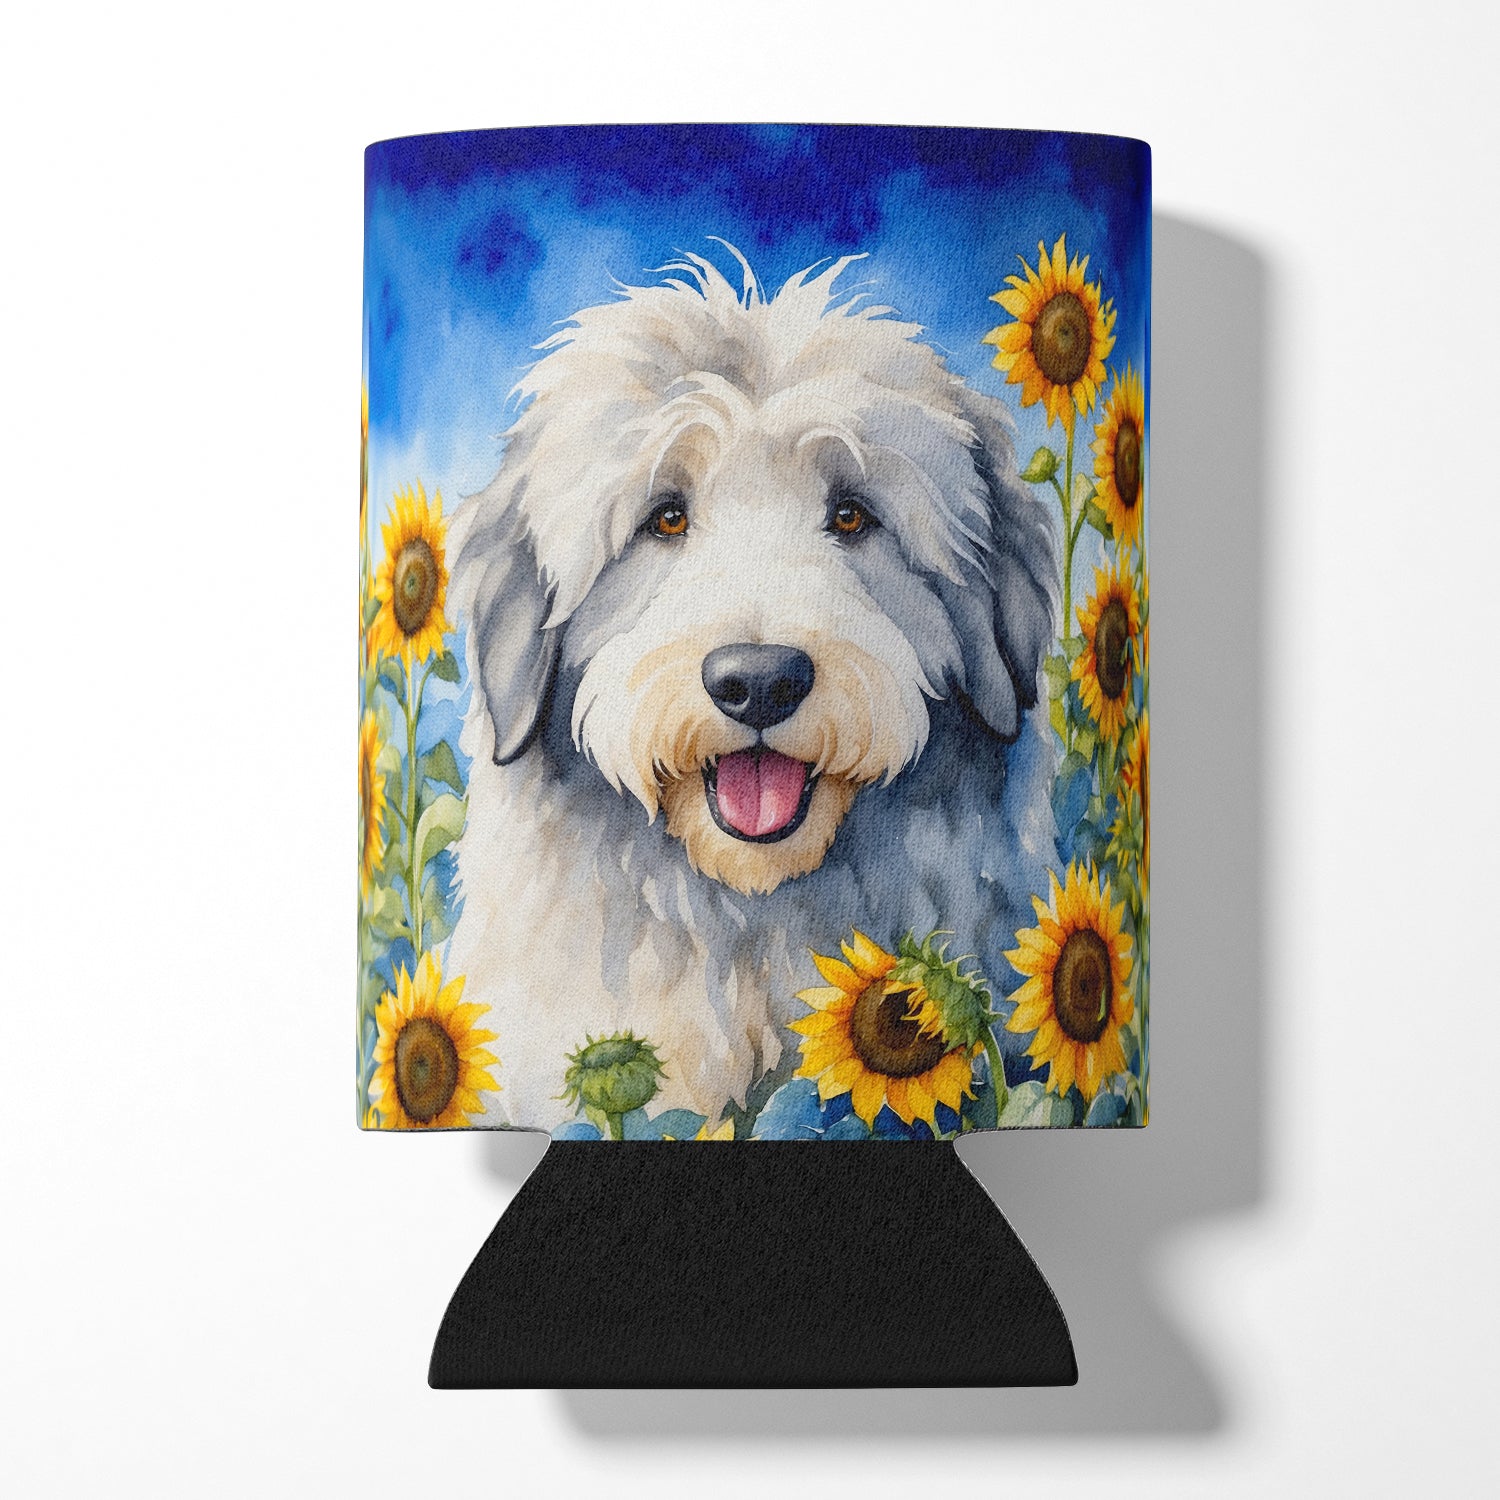 Buy this Old English Sheepdog in Sunflowers Can or Bottle Hugger